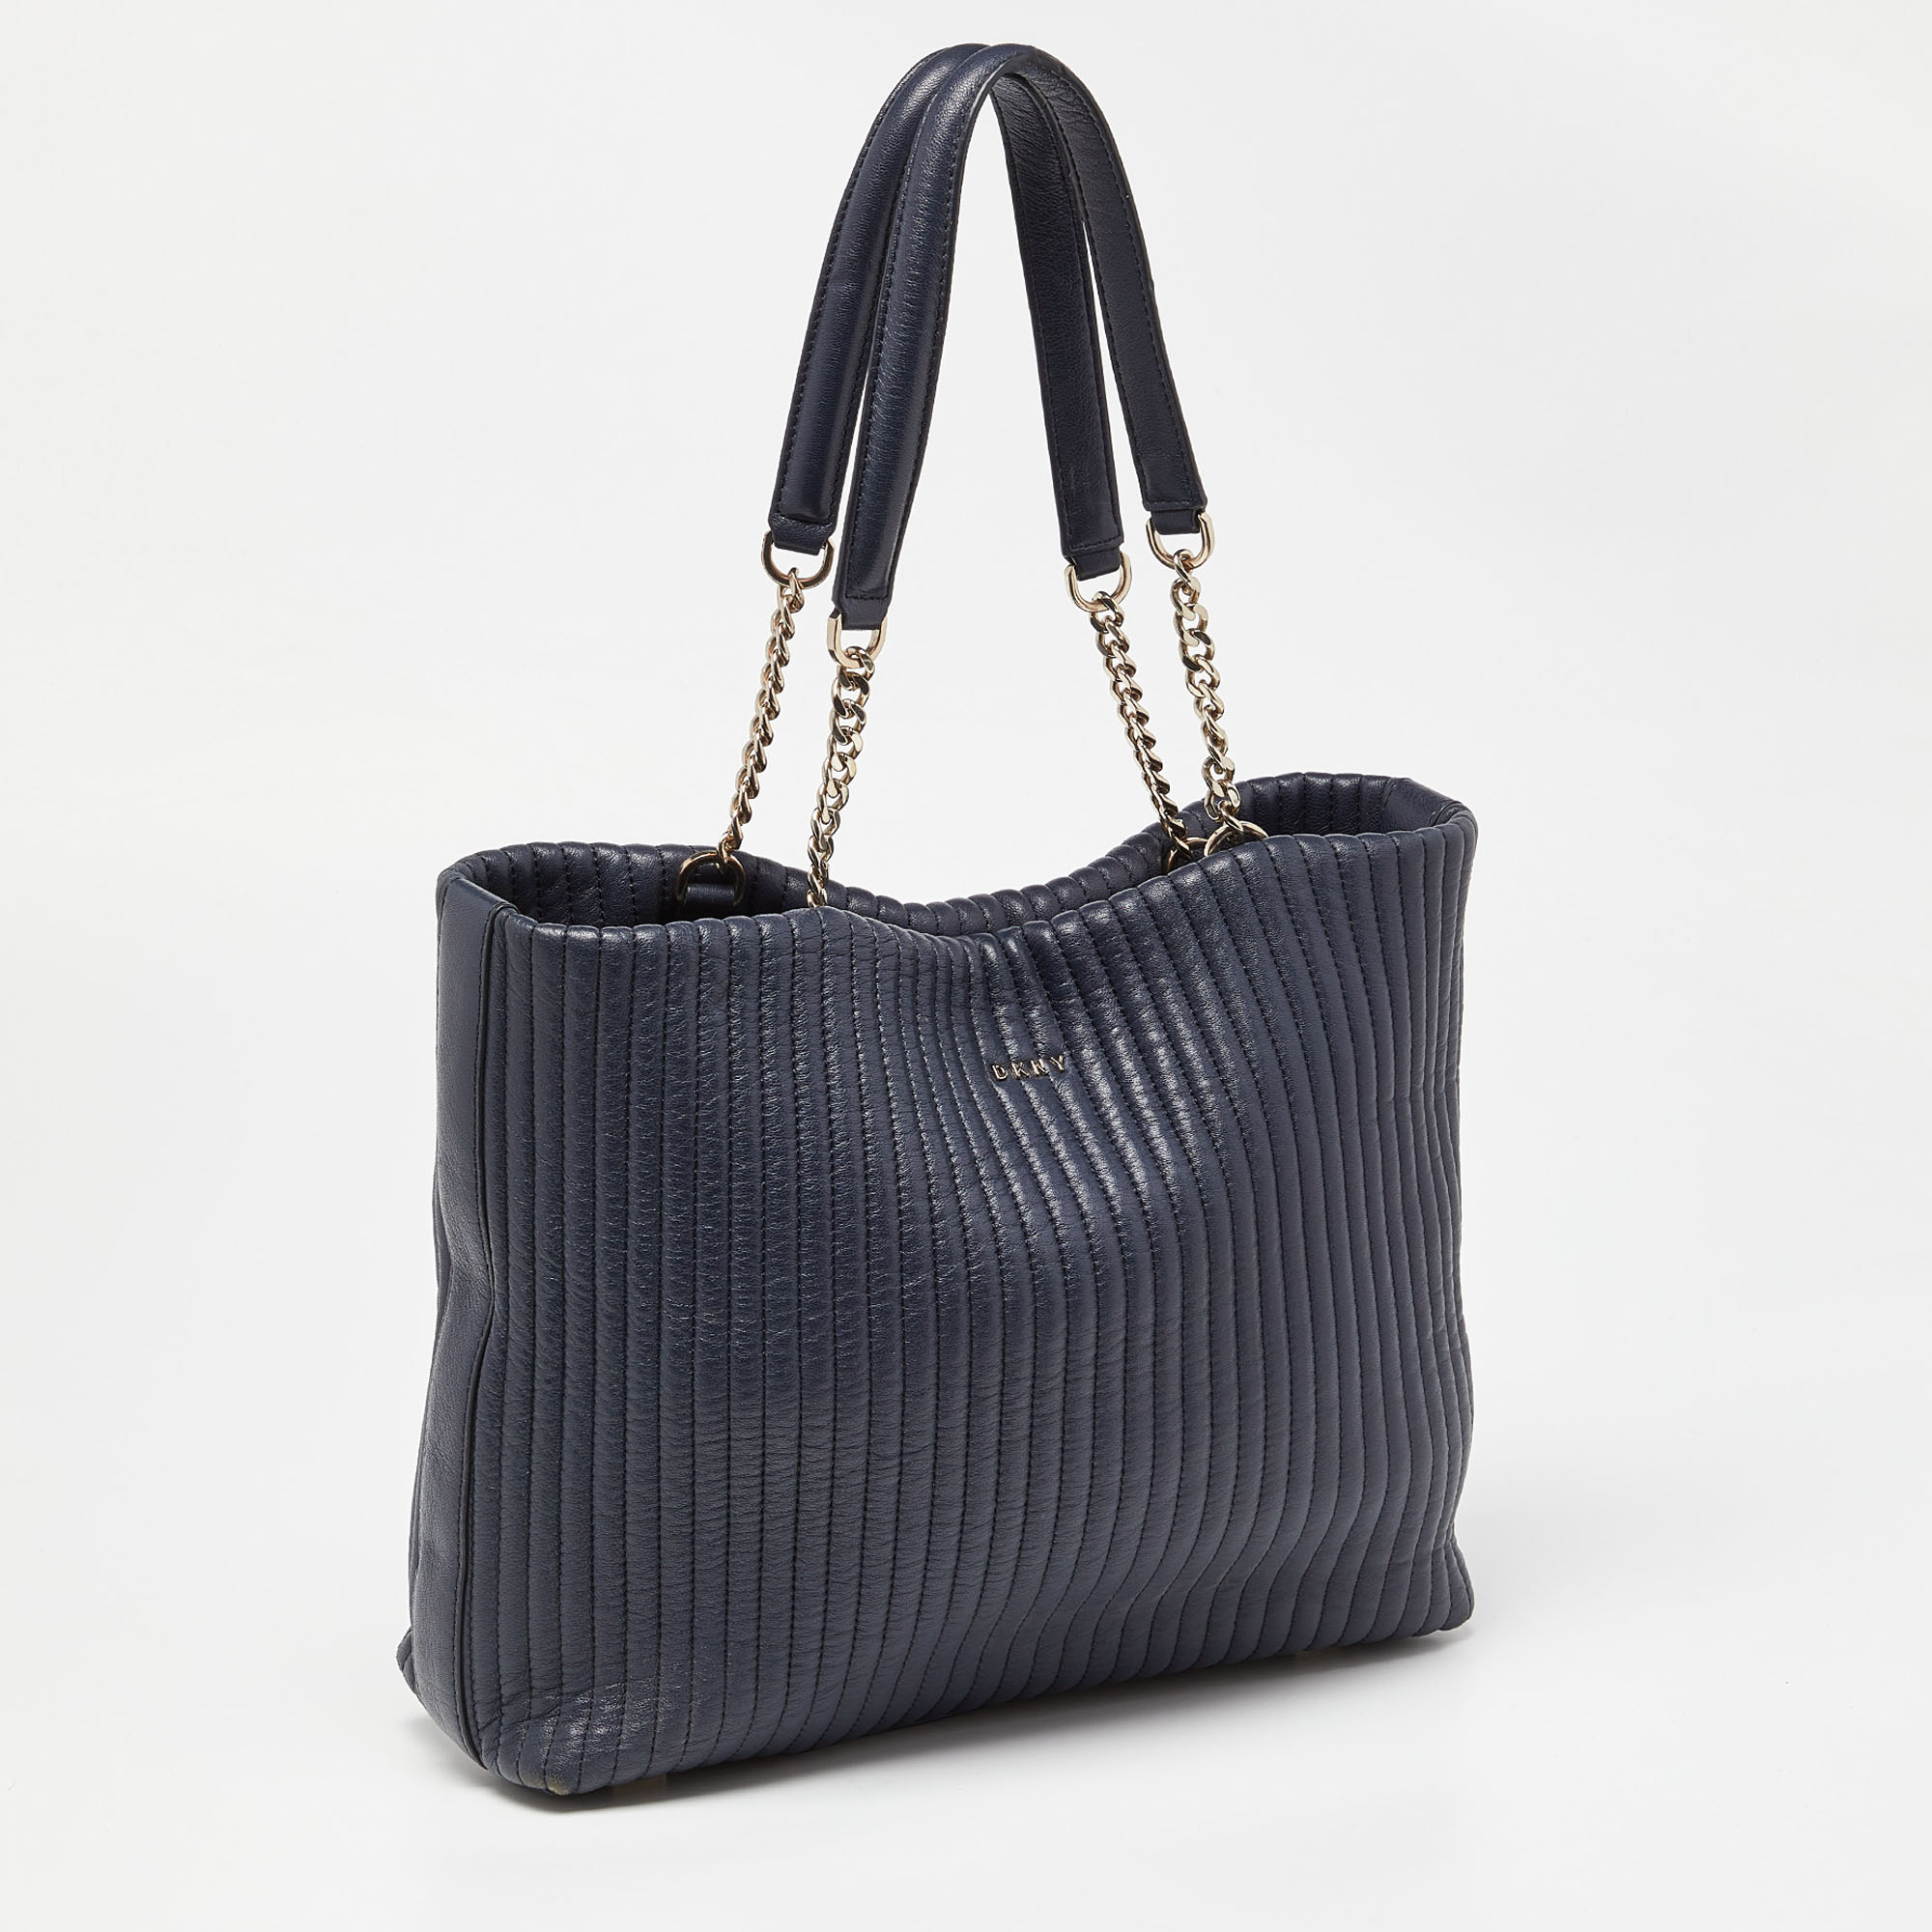 DKNY Blue Quilted Leather Chain Tote